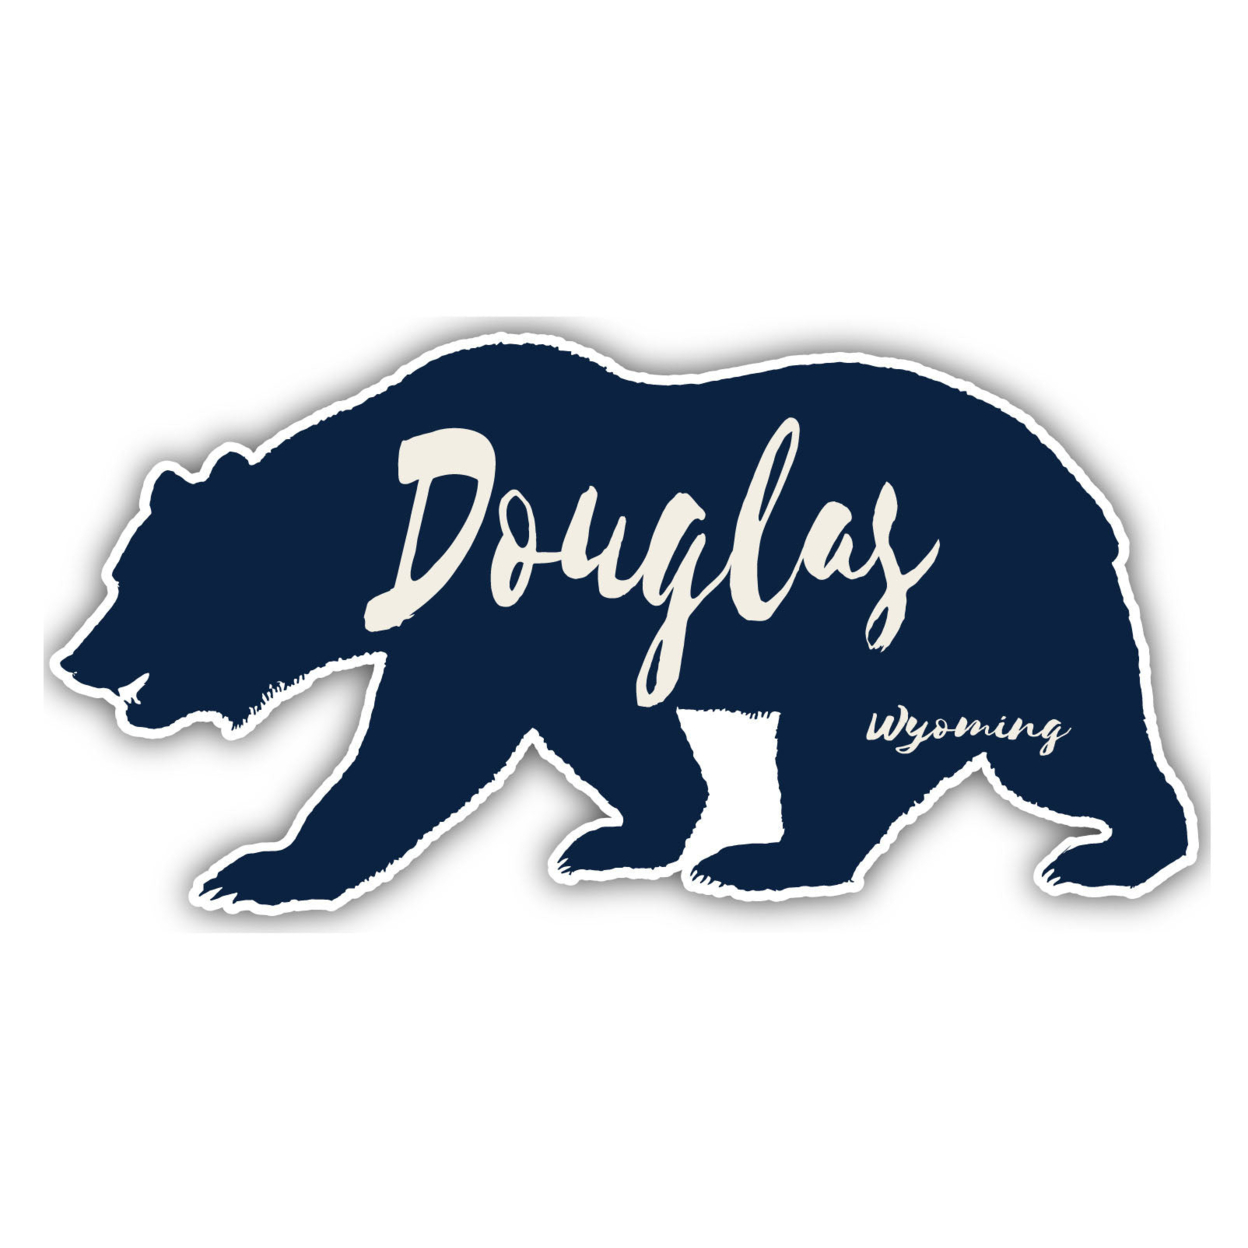 Douglas Wyoming Souvenir Decorative Stickers (Choose Theme And Size) - Single Unit, 10-Inch, Great Outdoors